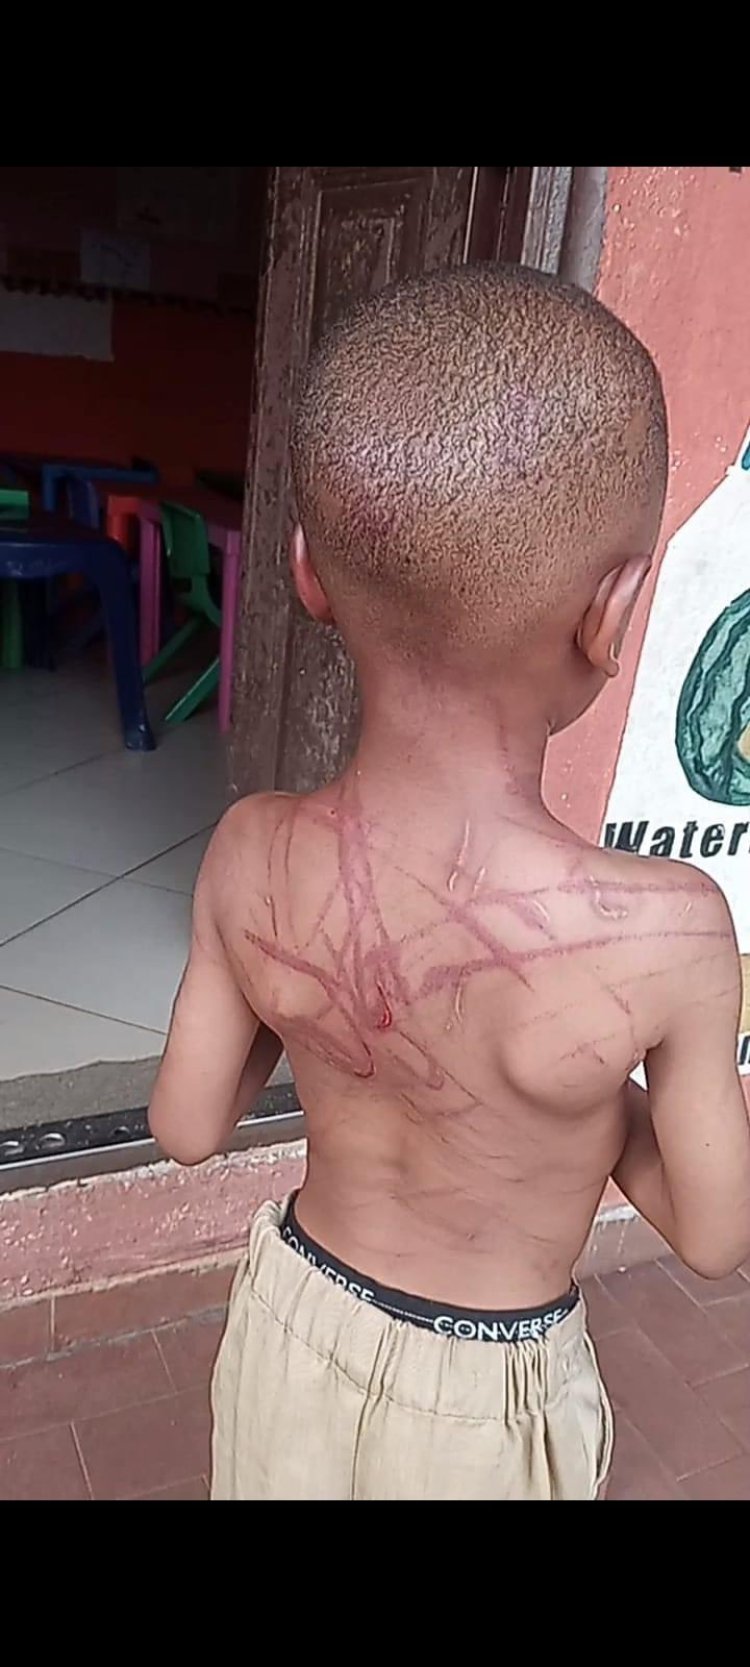 5 year Old Beaten up by Aunt, Boyfriend Over Claims he Spoilt Something In Boyfriend's Car